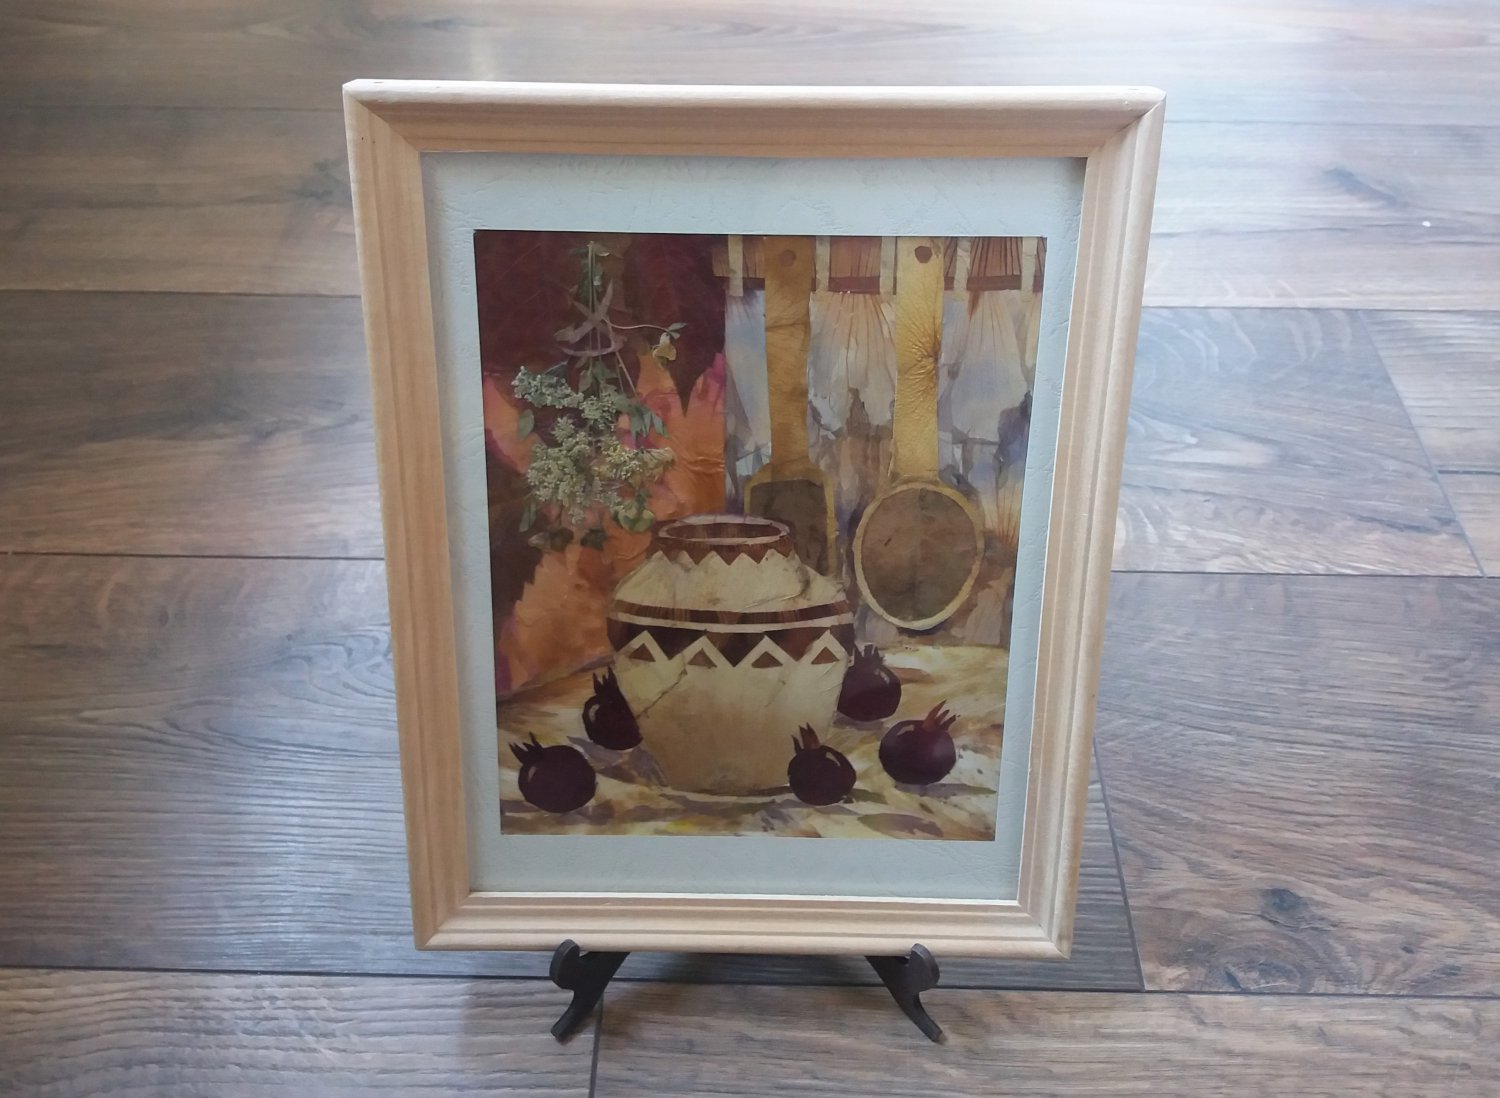 Nature Morte Picture in the Kitchen with Flowers Petals, Floral Art Work, Handmade Armenian